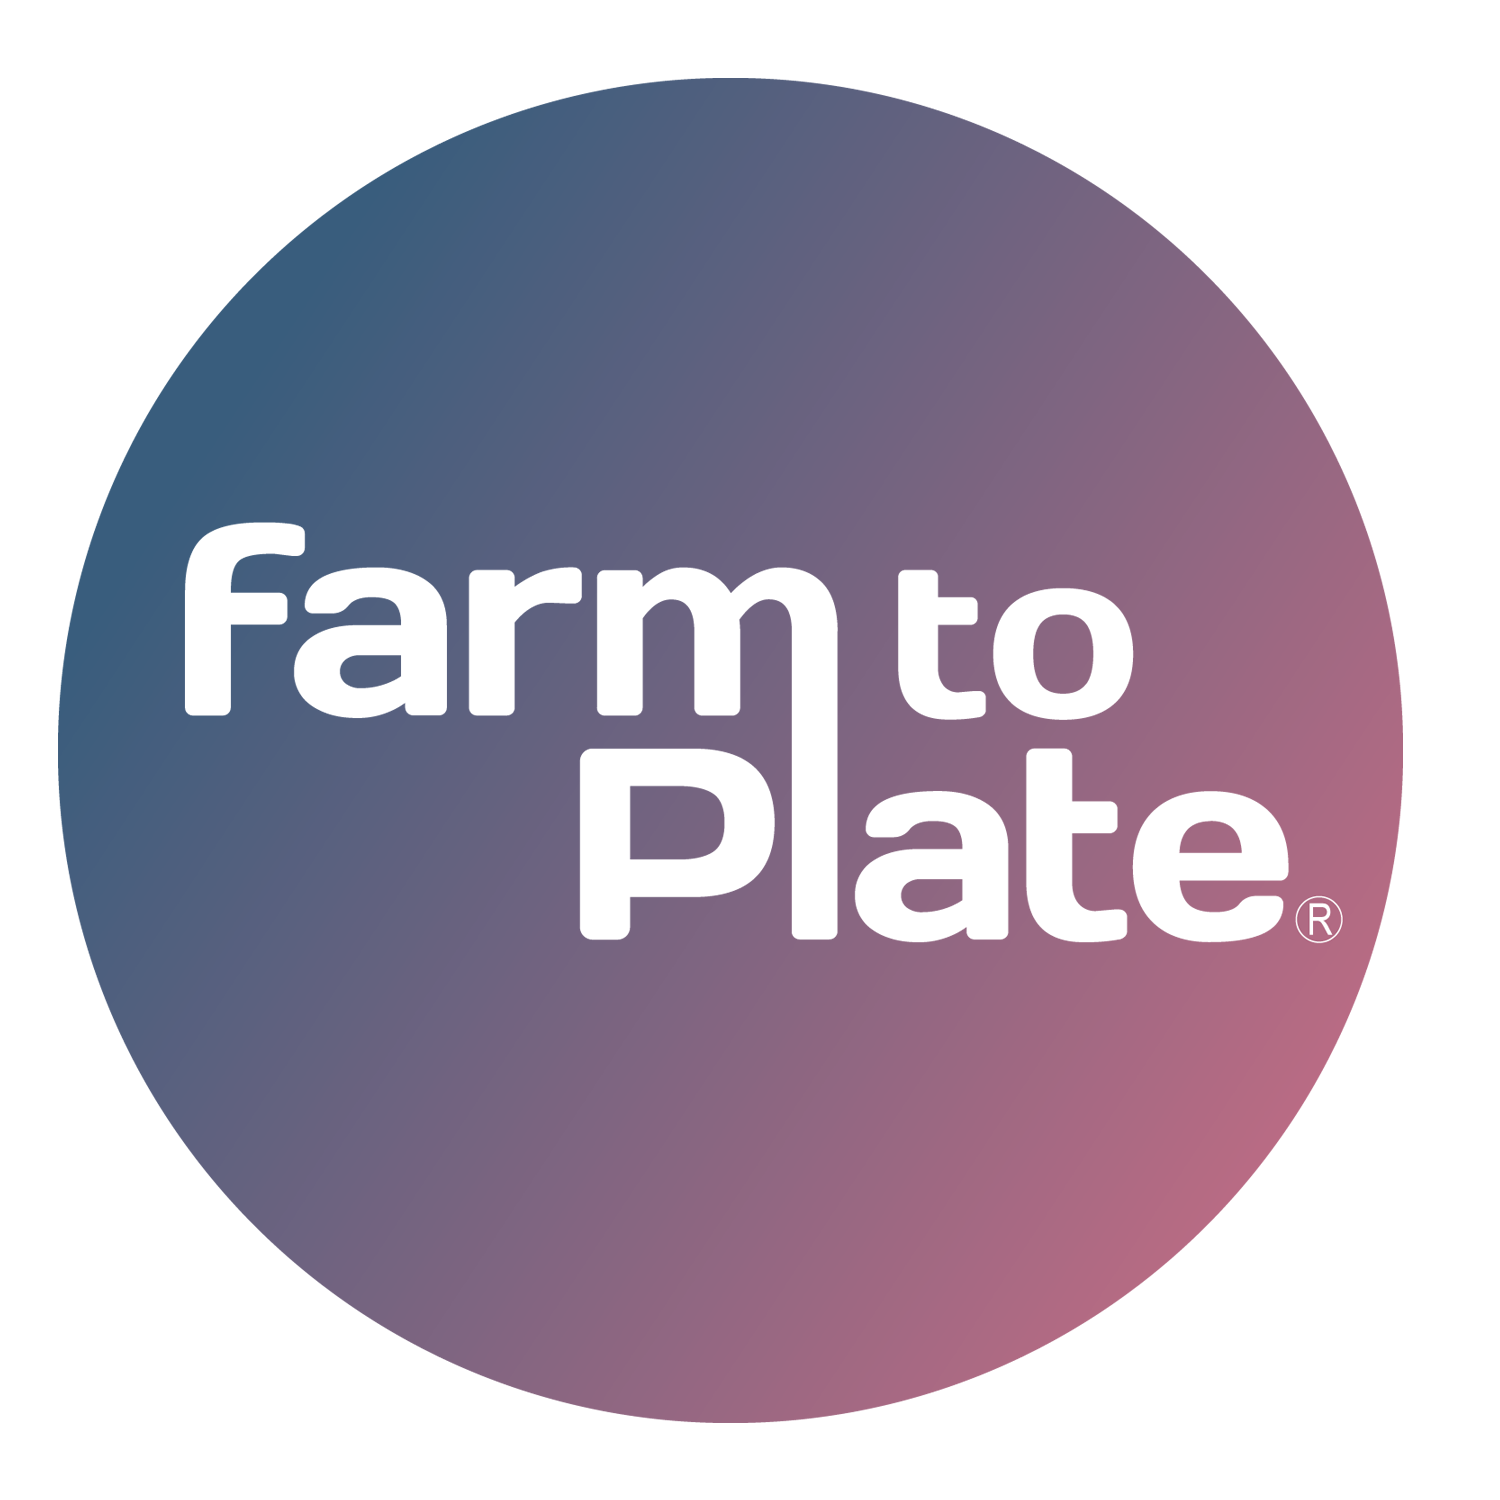 Farm to place